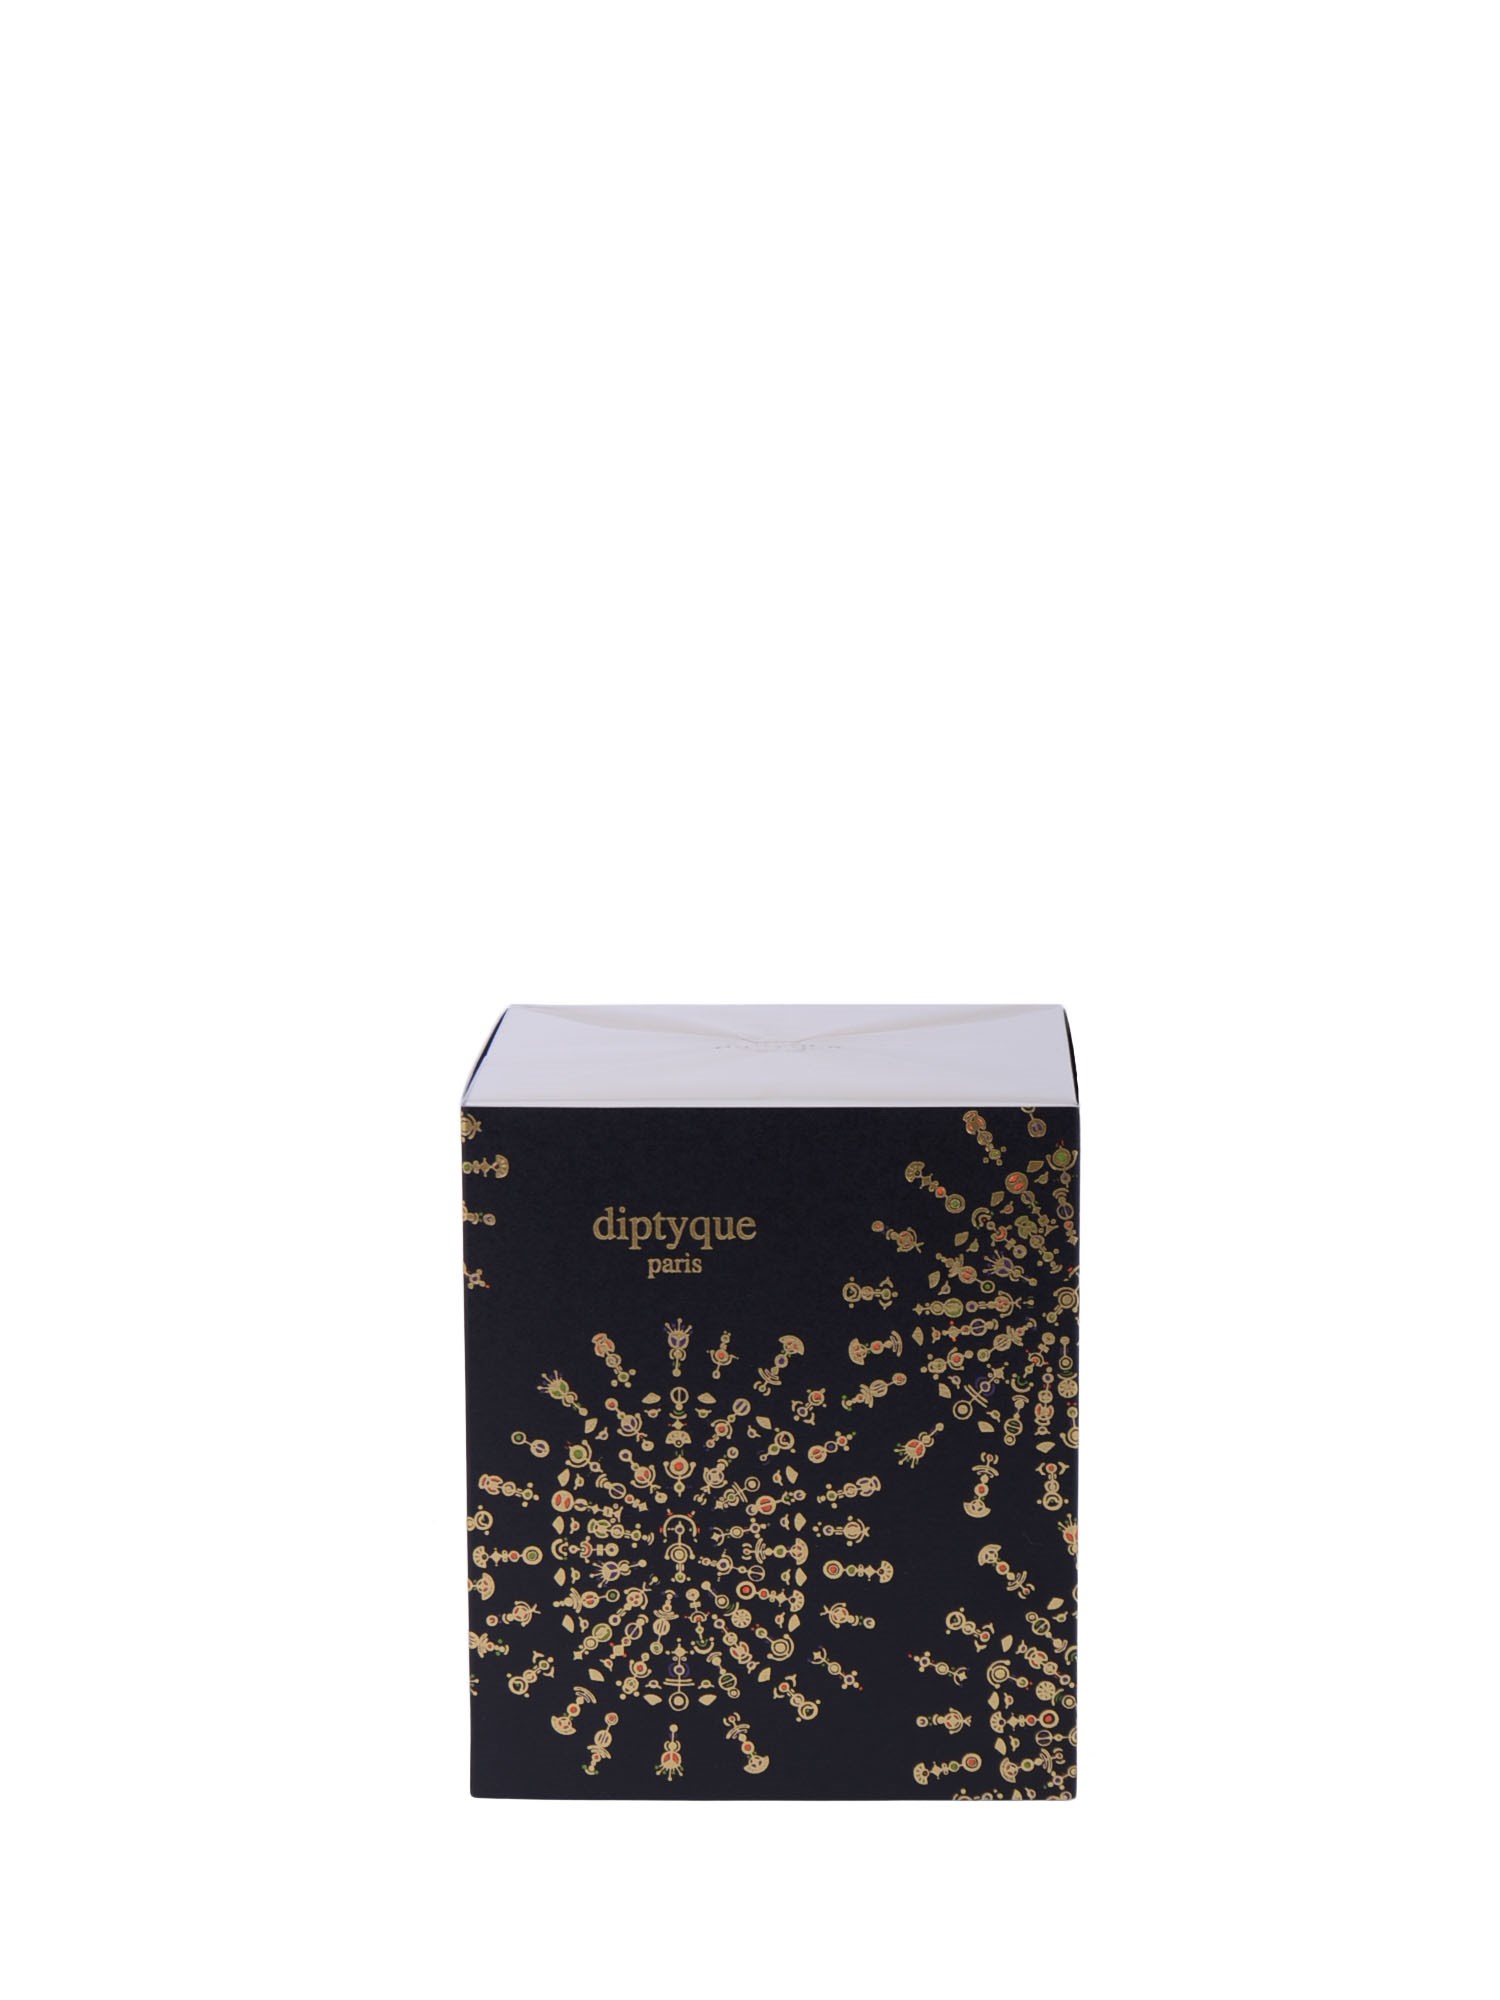 diptyque the art of body care traveling box